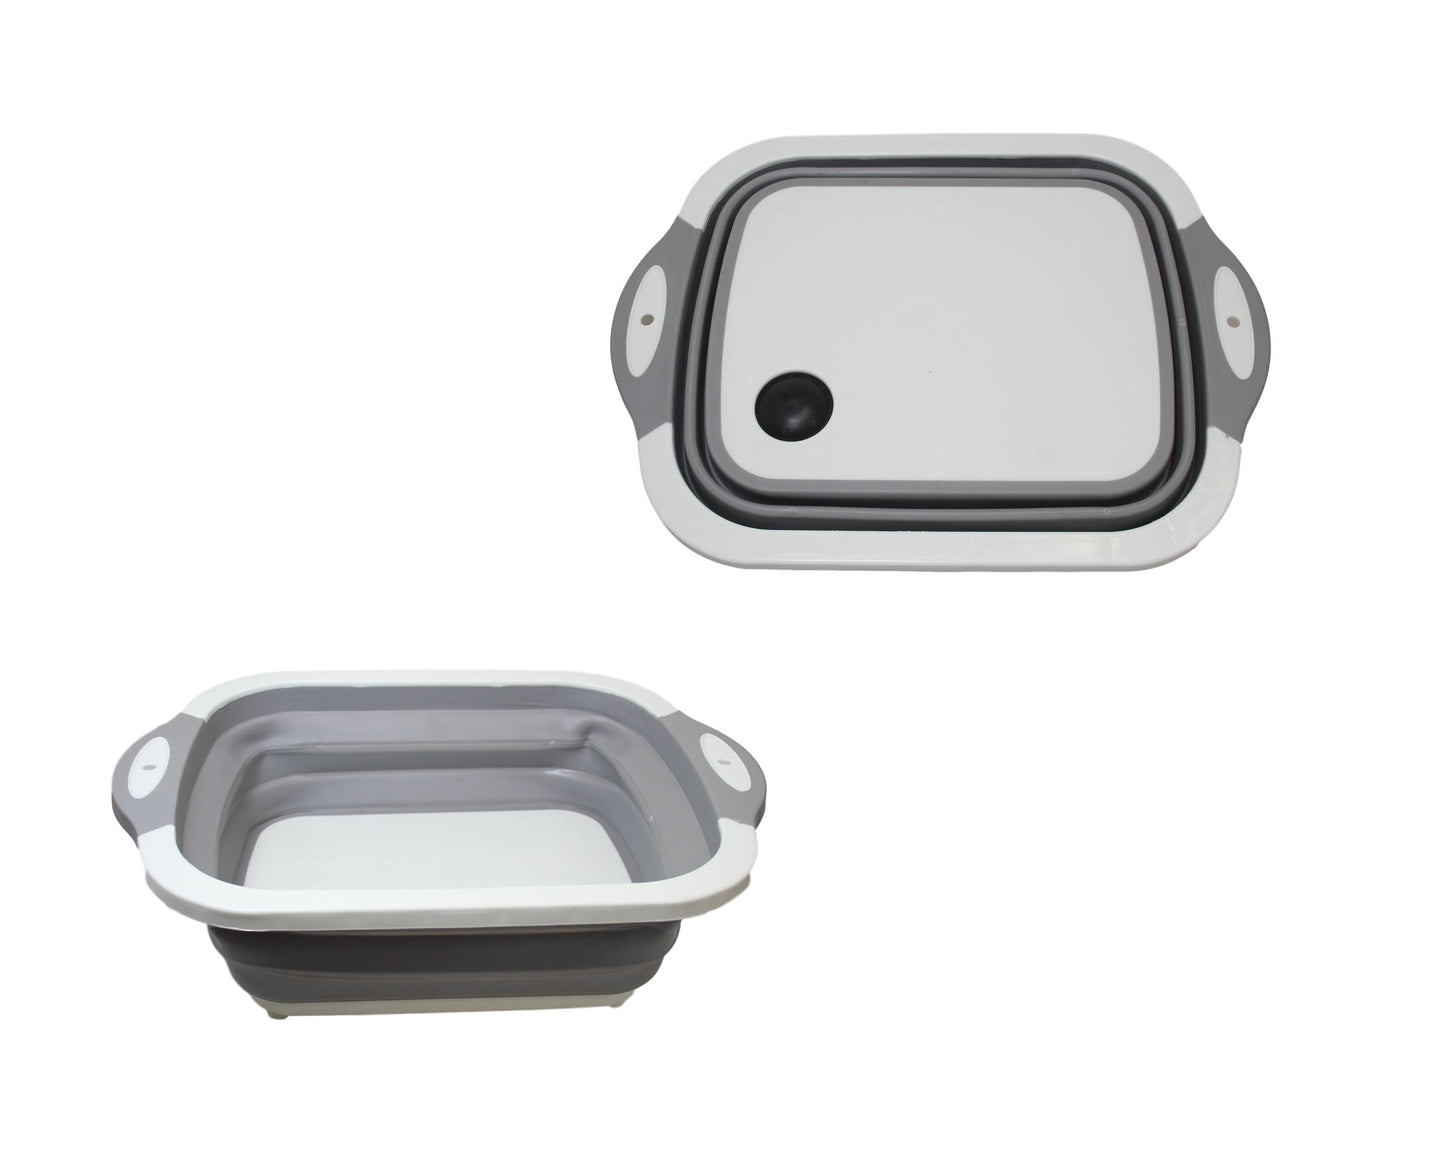 3 In 1 Collapsible Chopping Board Wash Basin And Serving Bowl Basket 6397 (Parcel Rate)